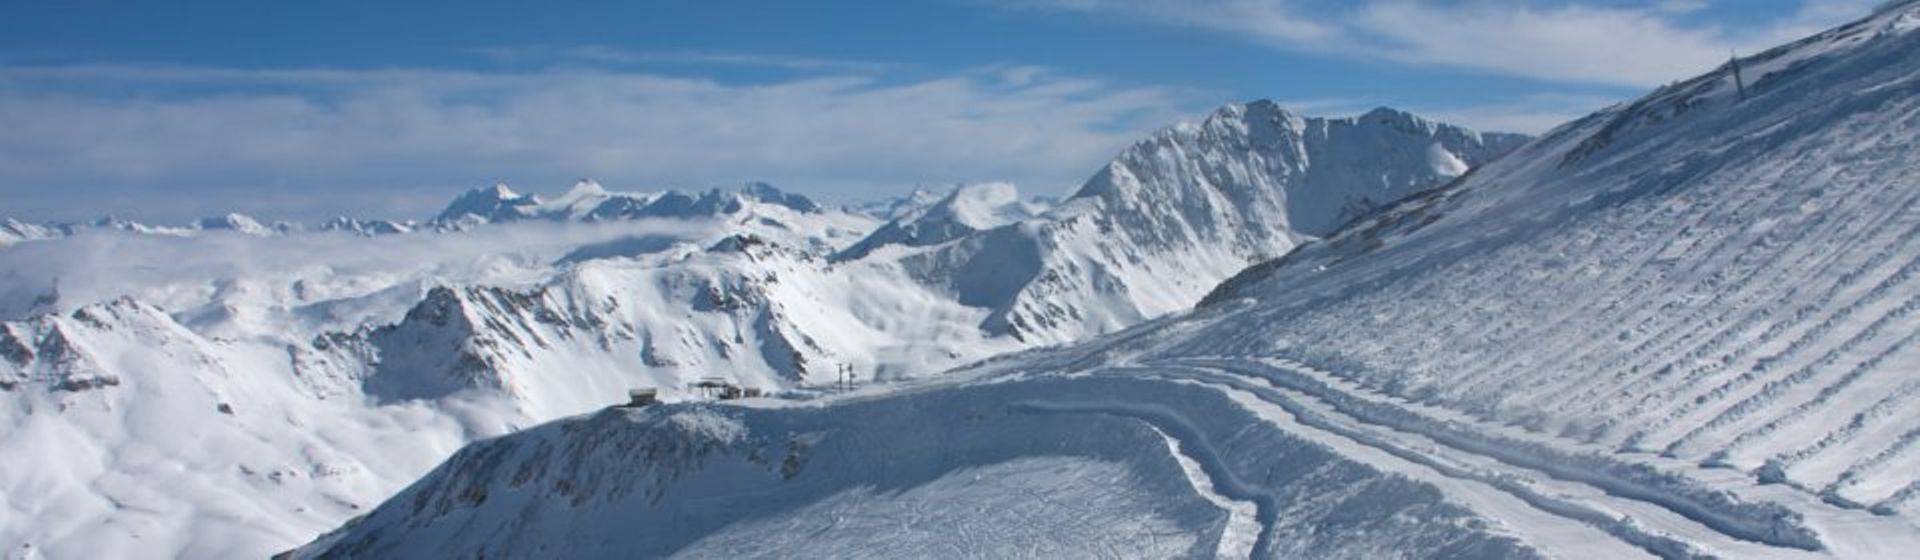 Holidays to Val D'Isere Image